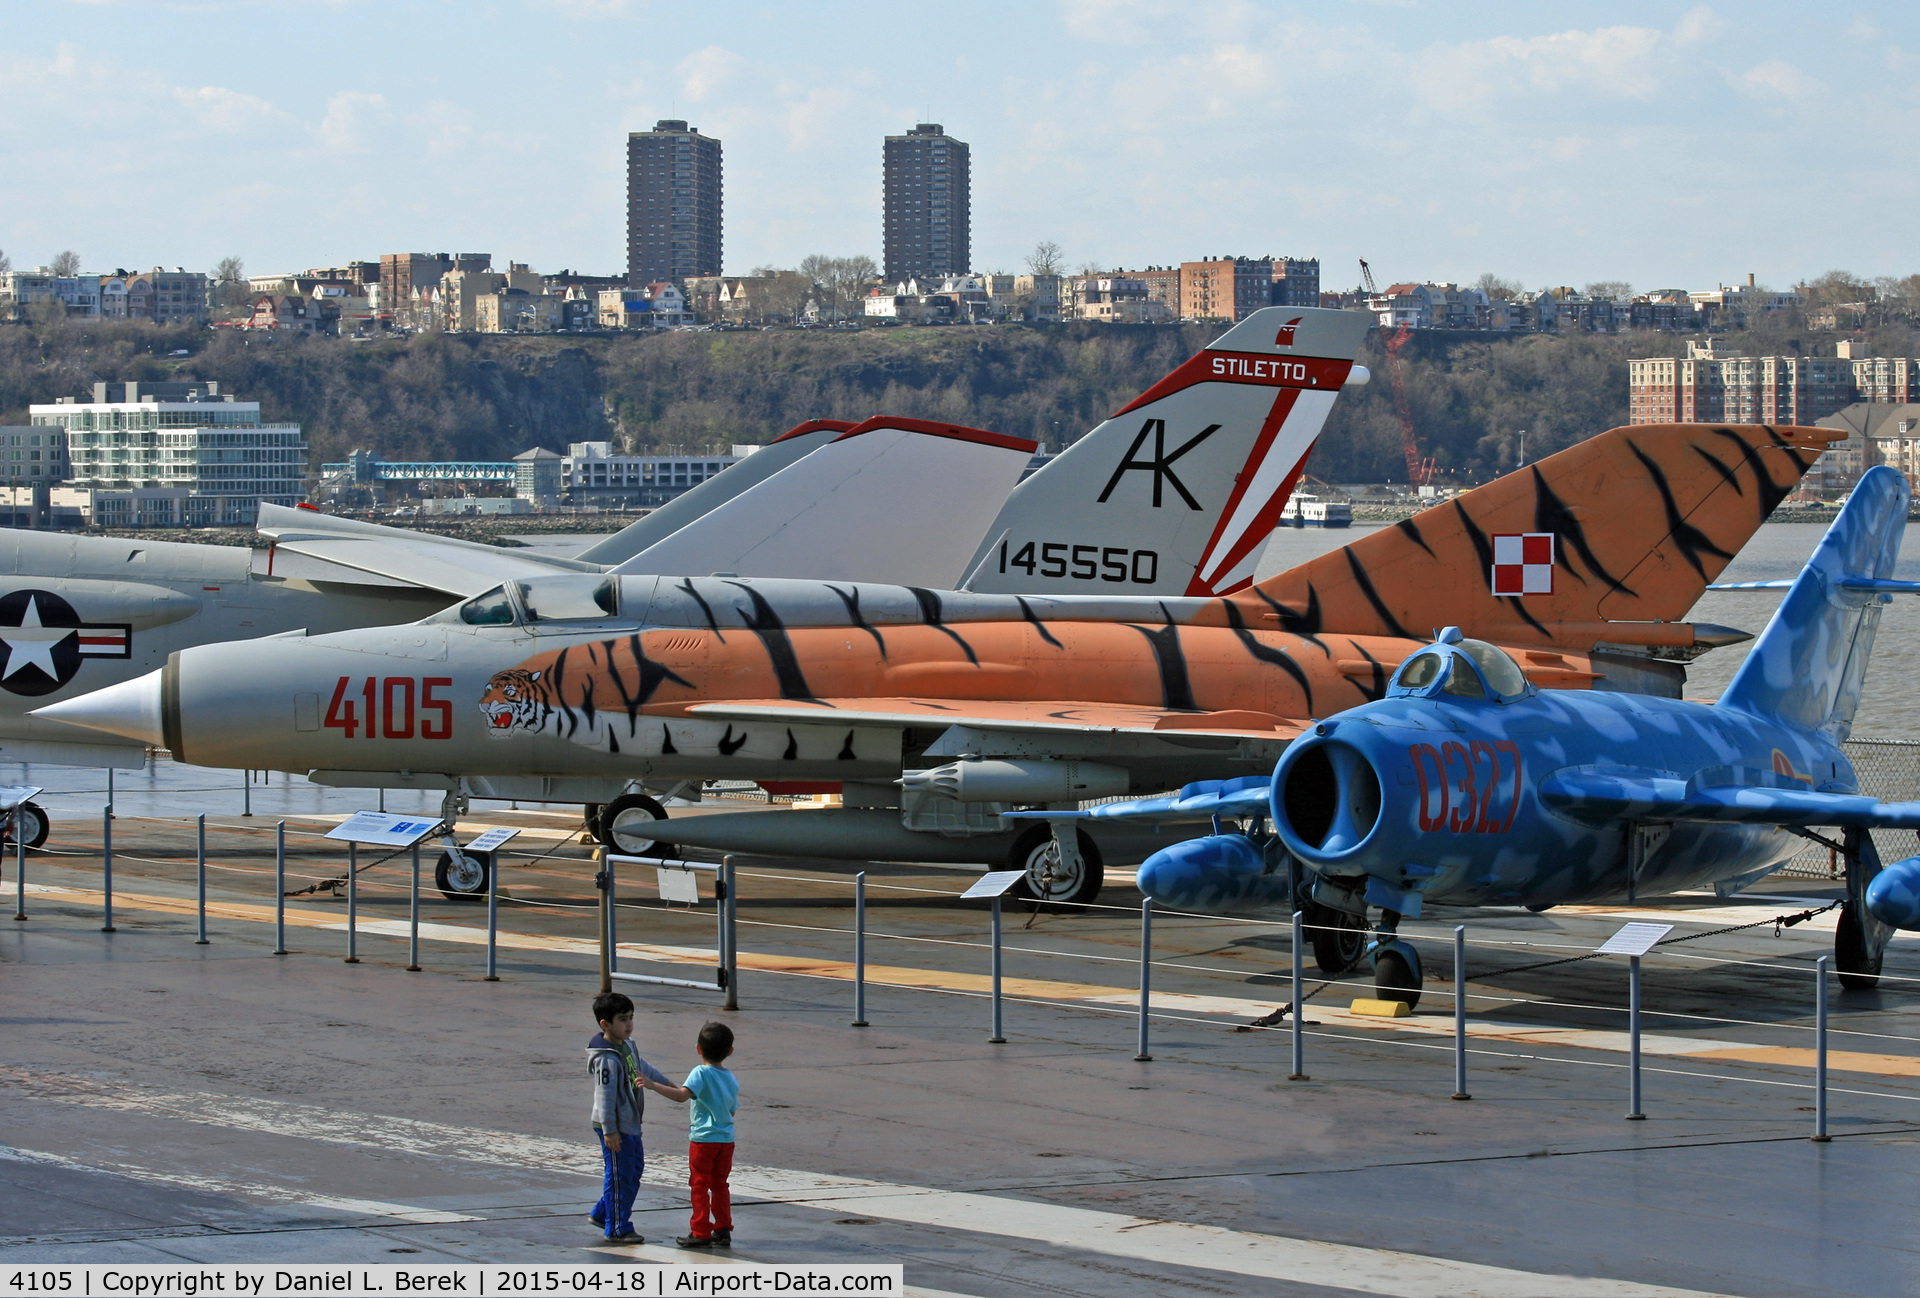 4105, Mikoyan-Gurevich MiG-21PFM C/N 94A4105, This aircraft has been beautifully restored in this spectacular color scheme.